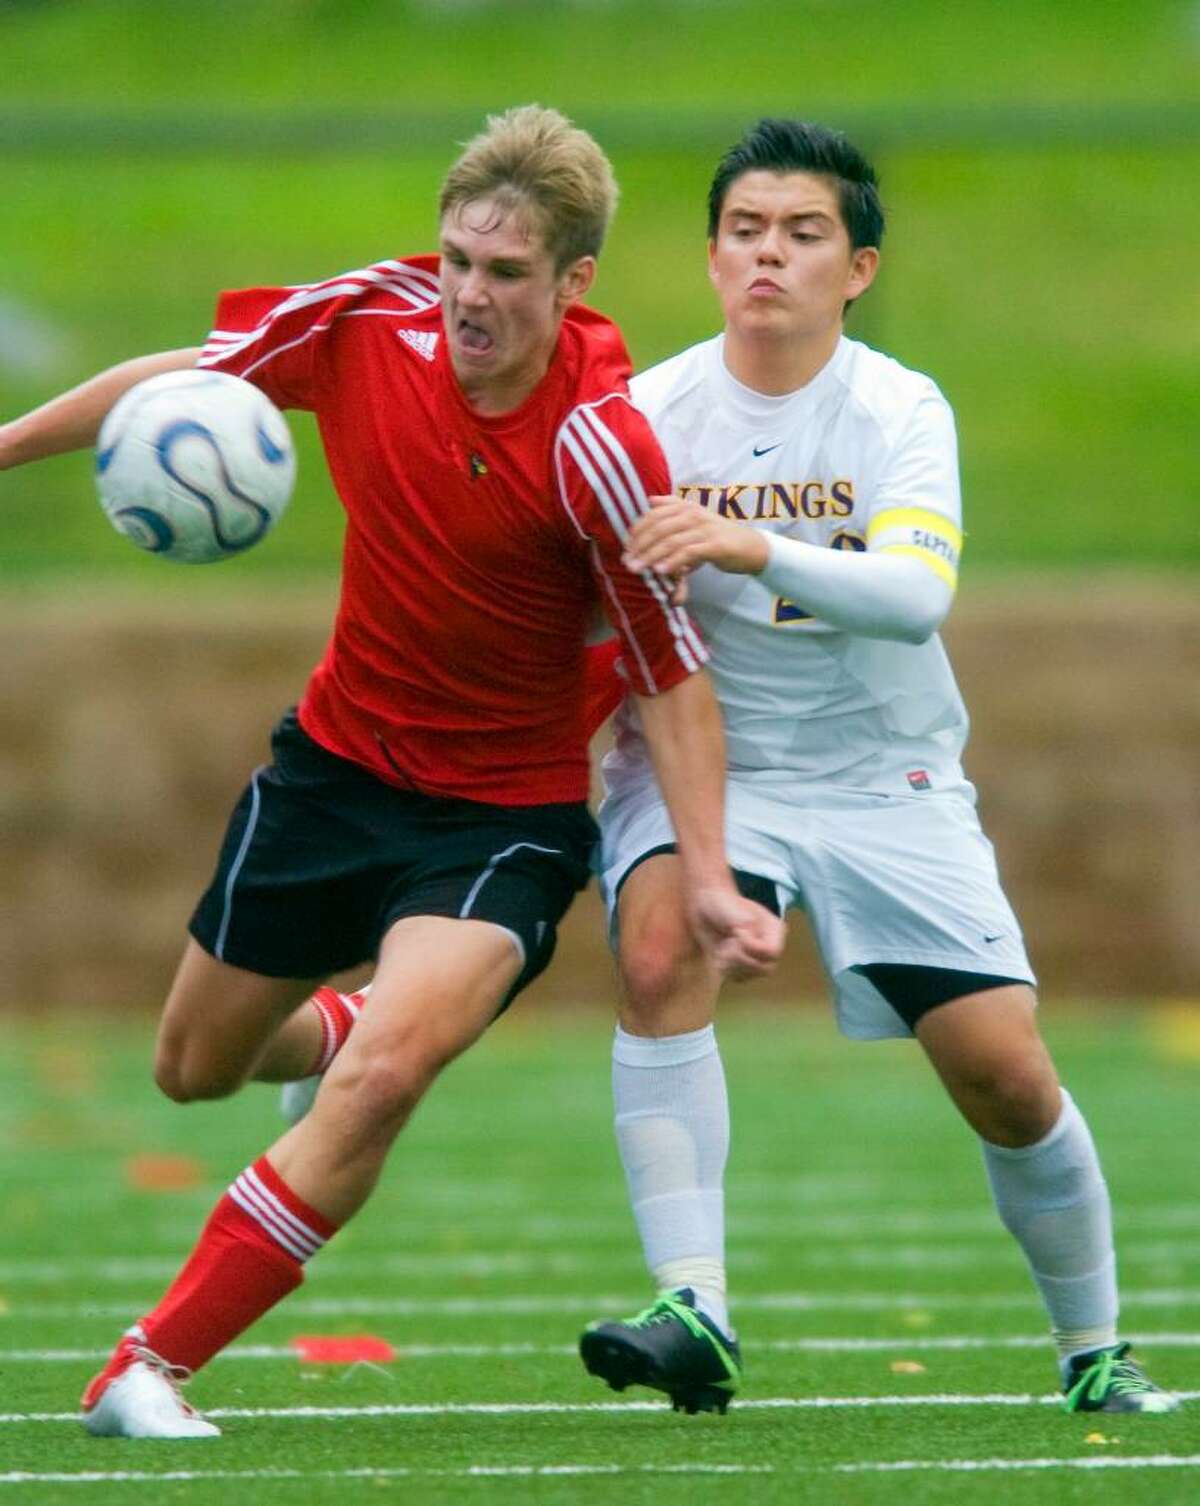 Gregory Kane, left, of Greenwich High School, and Henry Bareiss, right, of Westhill High School, during an FCIAC soccer match at Westhill High School in Stamford on Tuesday, Sept. 29, 2009.